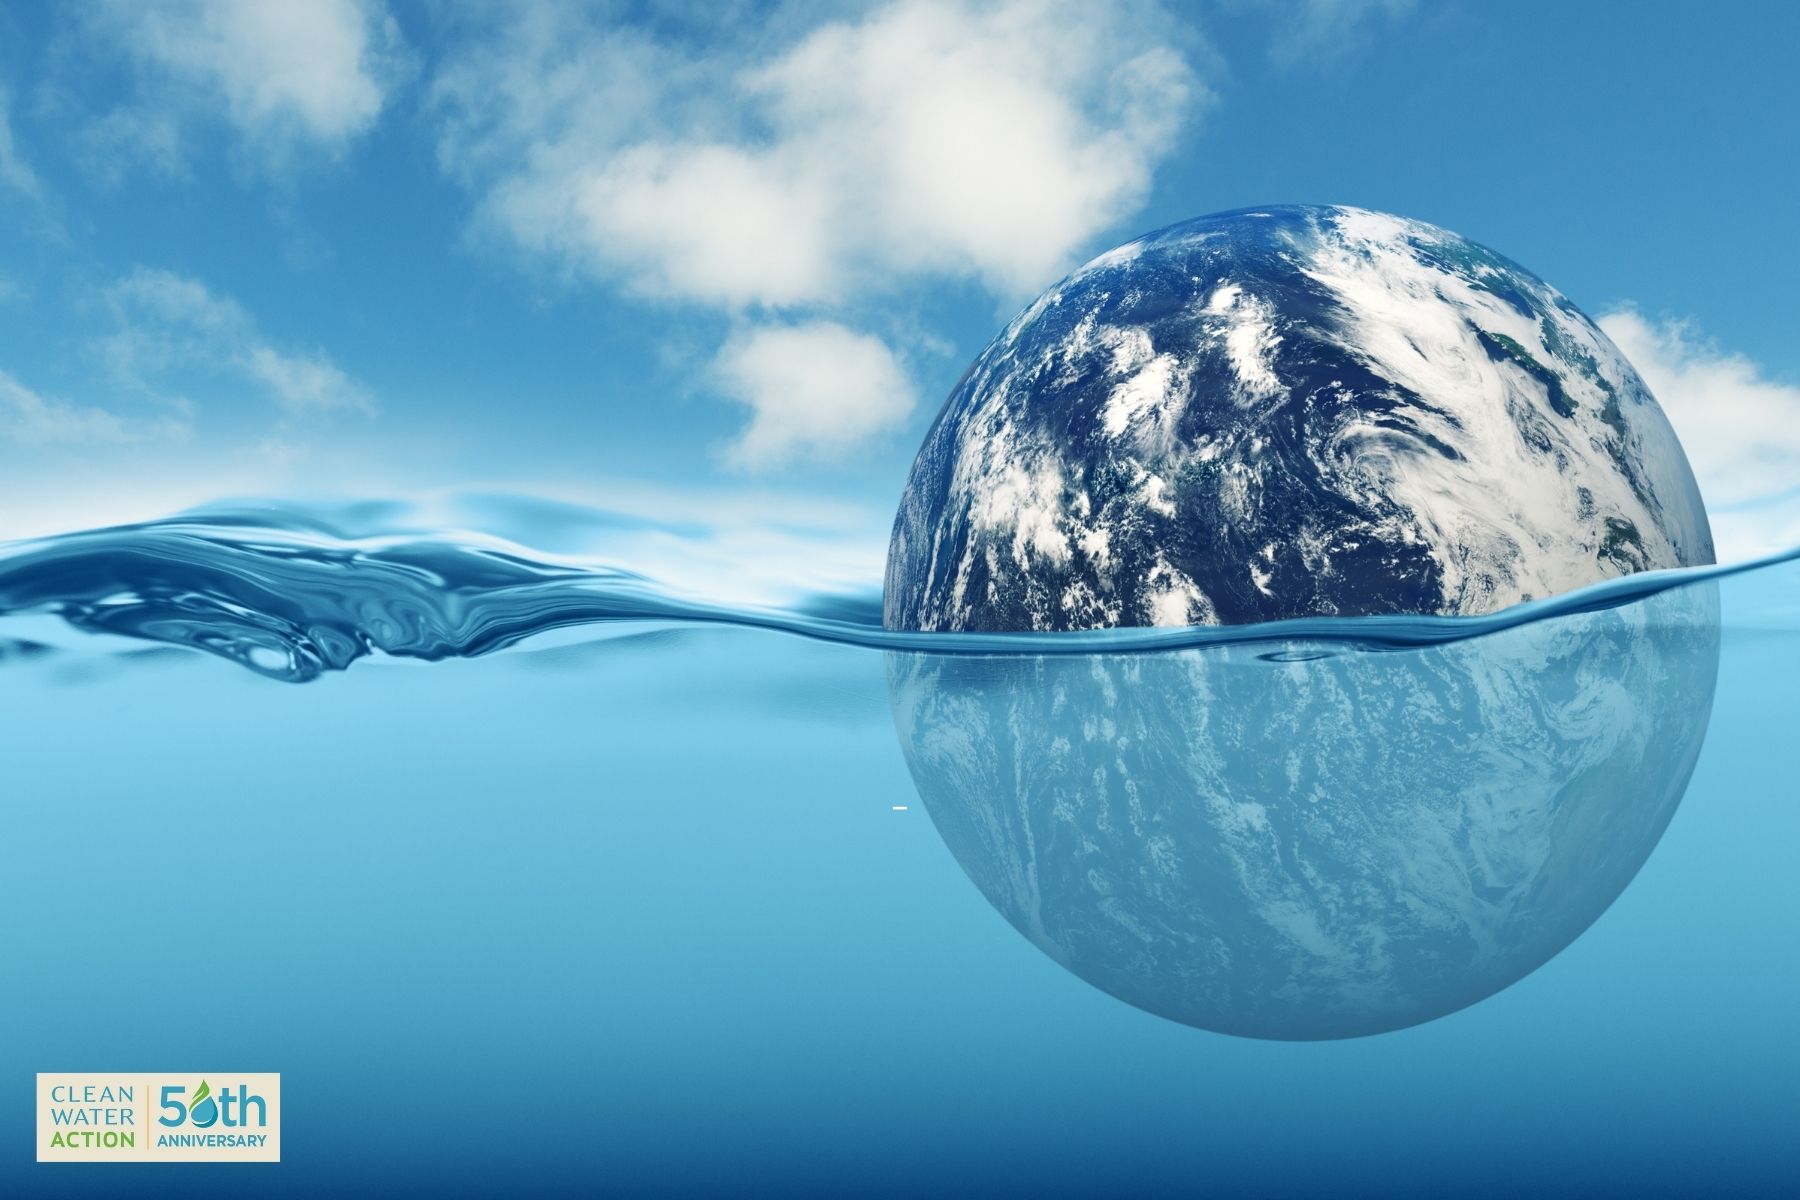 national-climate-change-canva-earth floating in water.jpg